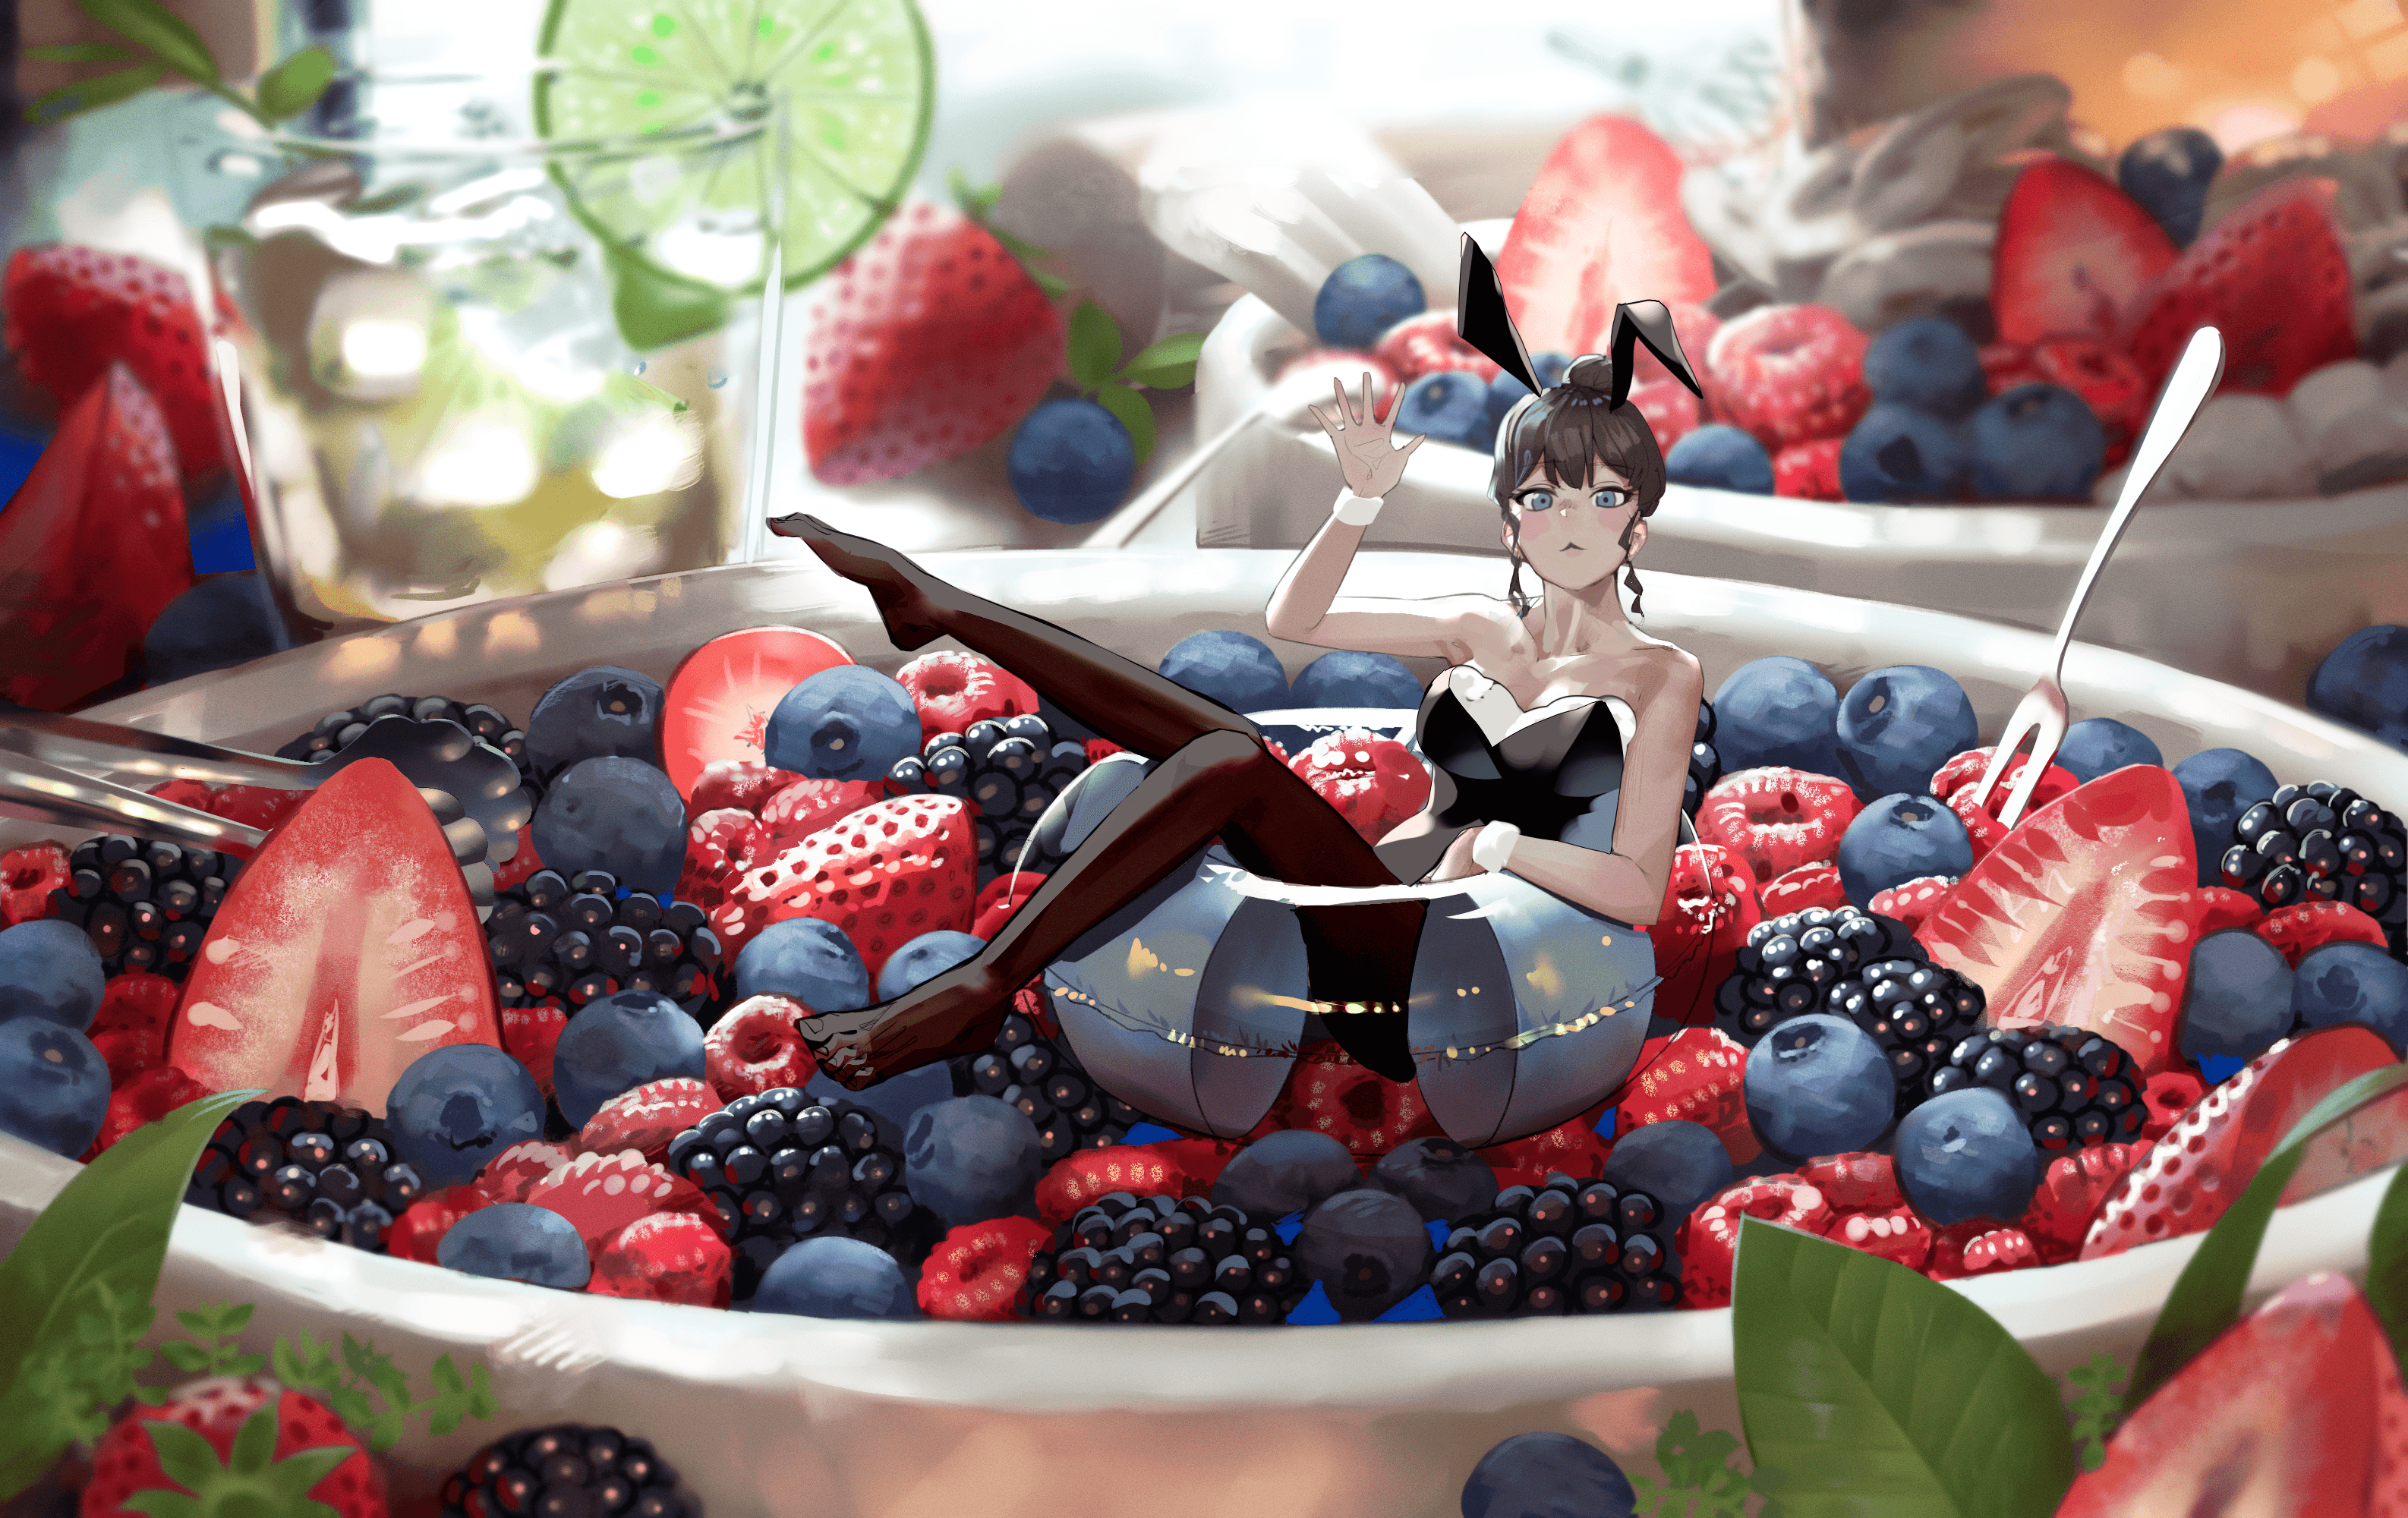 The Pool of Fruits